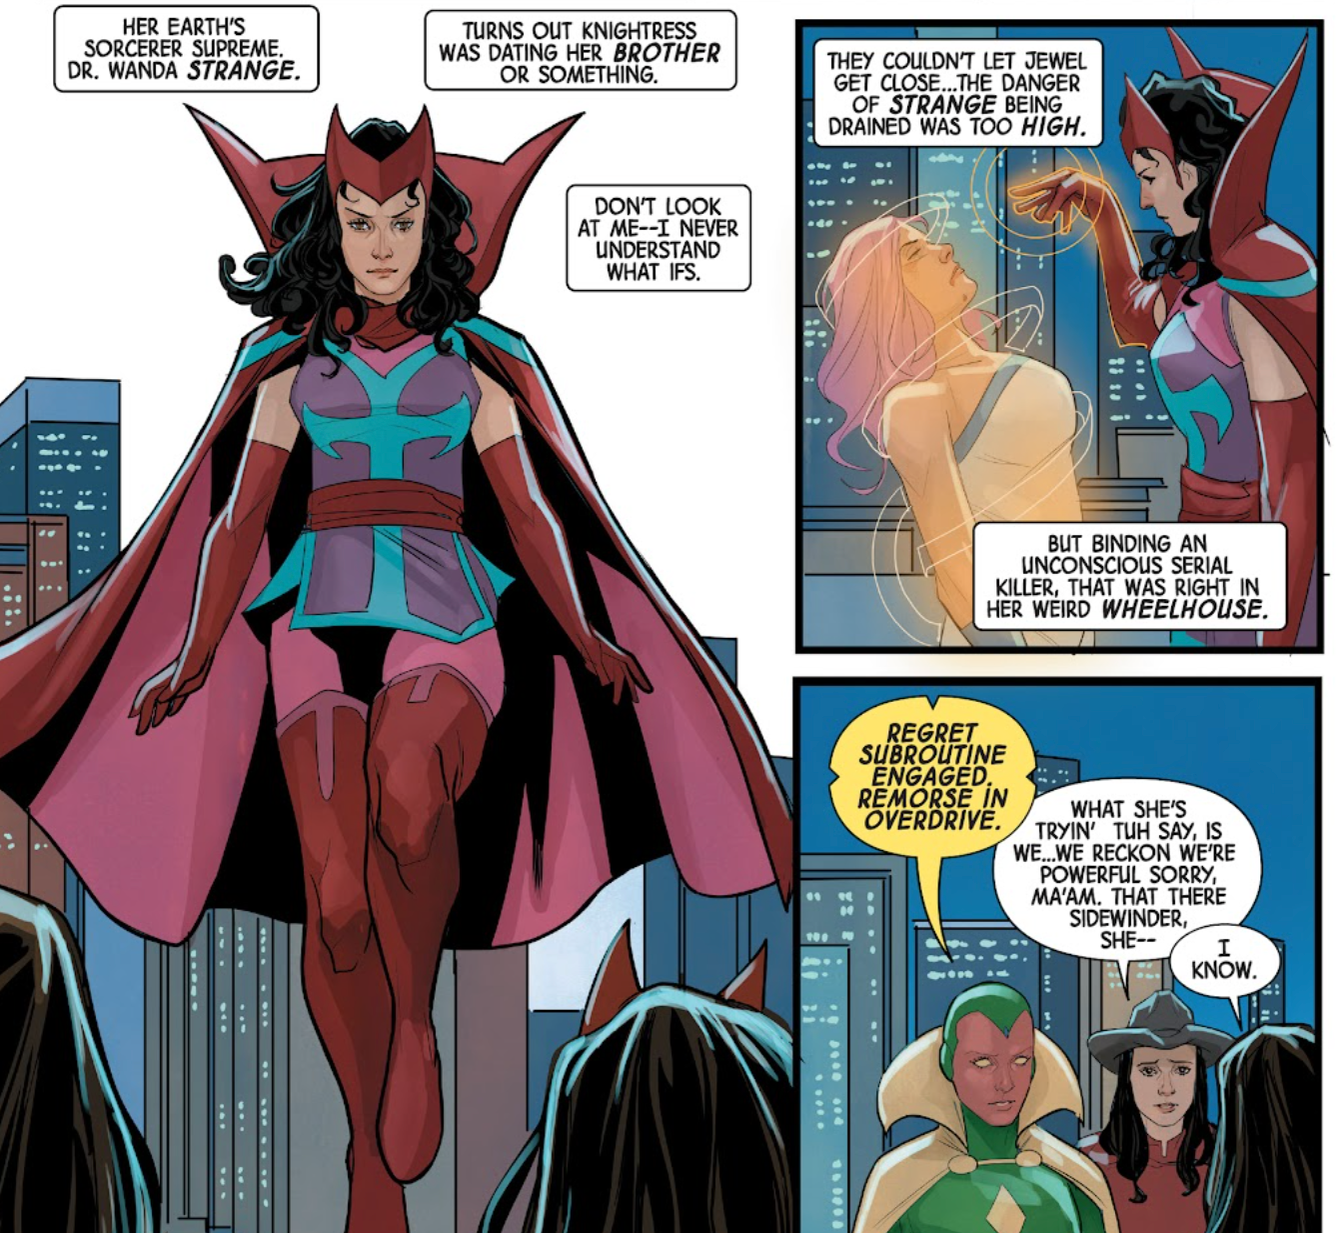 Scarlet Witch (2023) #5 See more